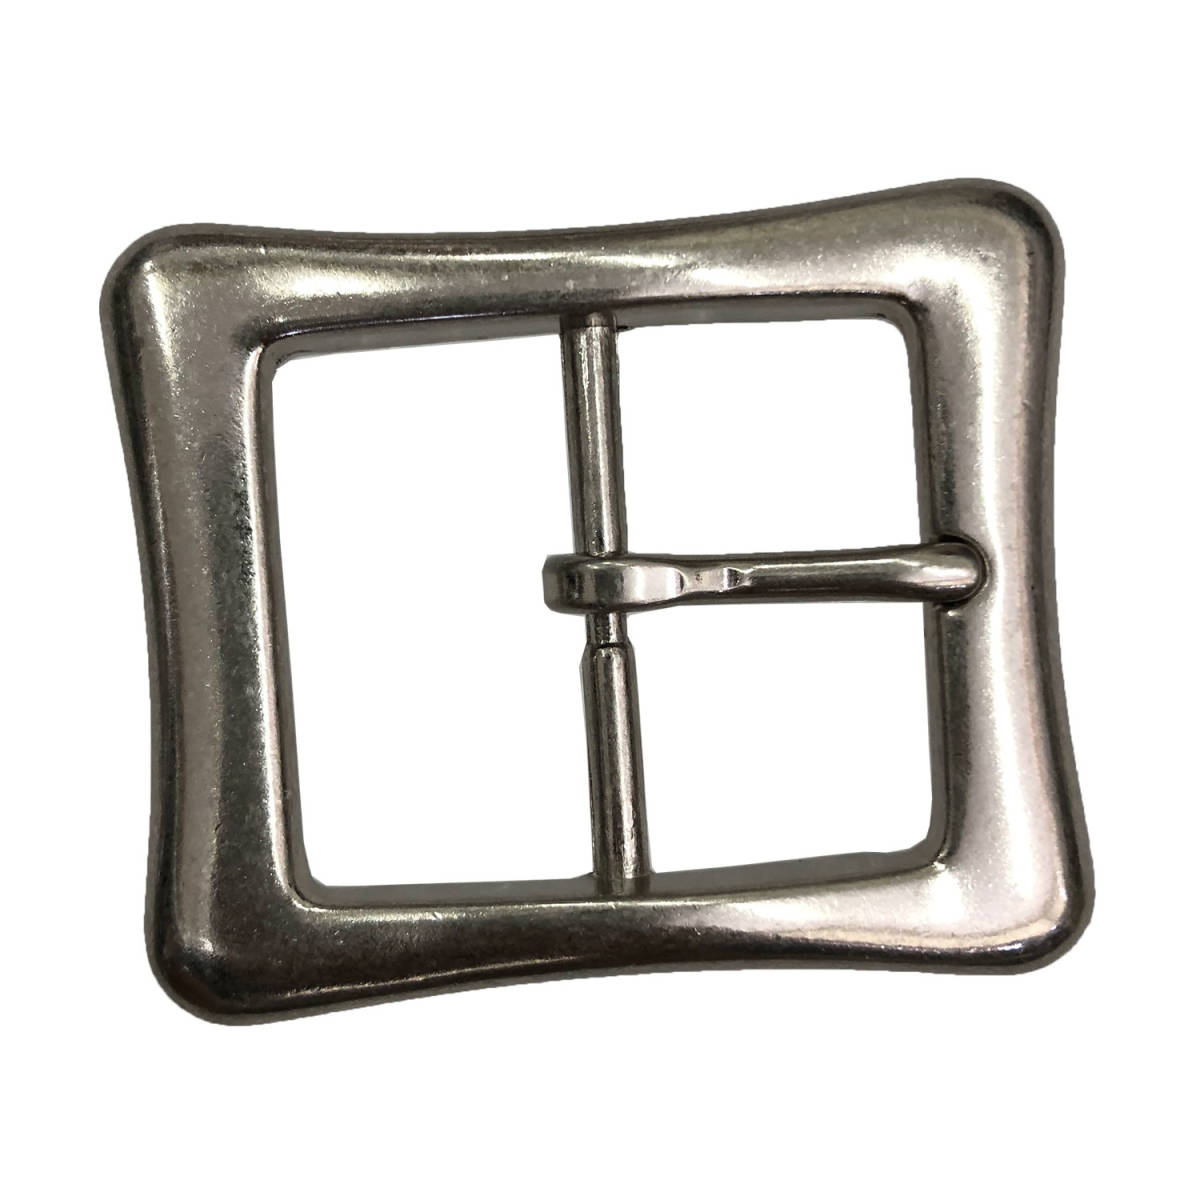  new goods belt buckle buckle only 40mm for men's lady's silver cusomize metal fittings stop gold silver simple bnh002 BEND